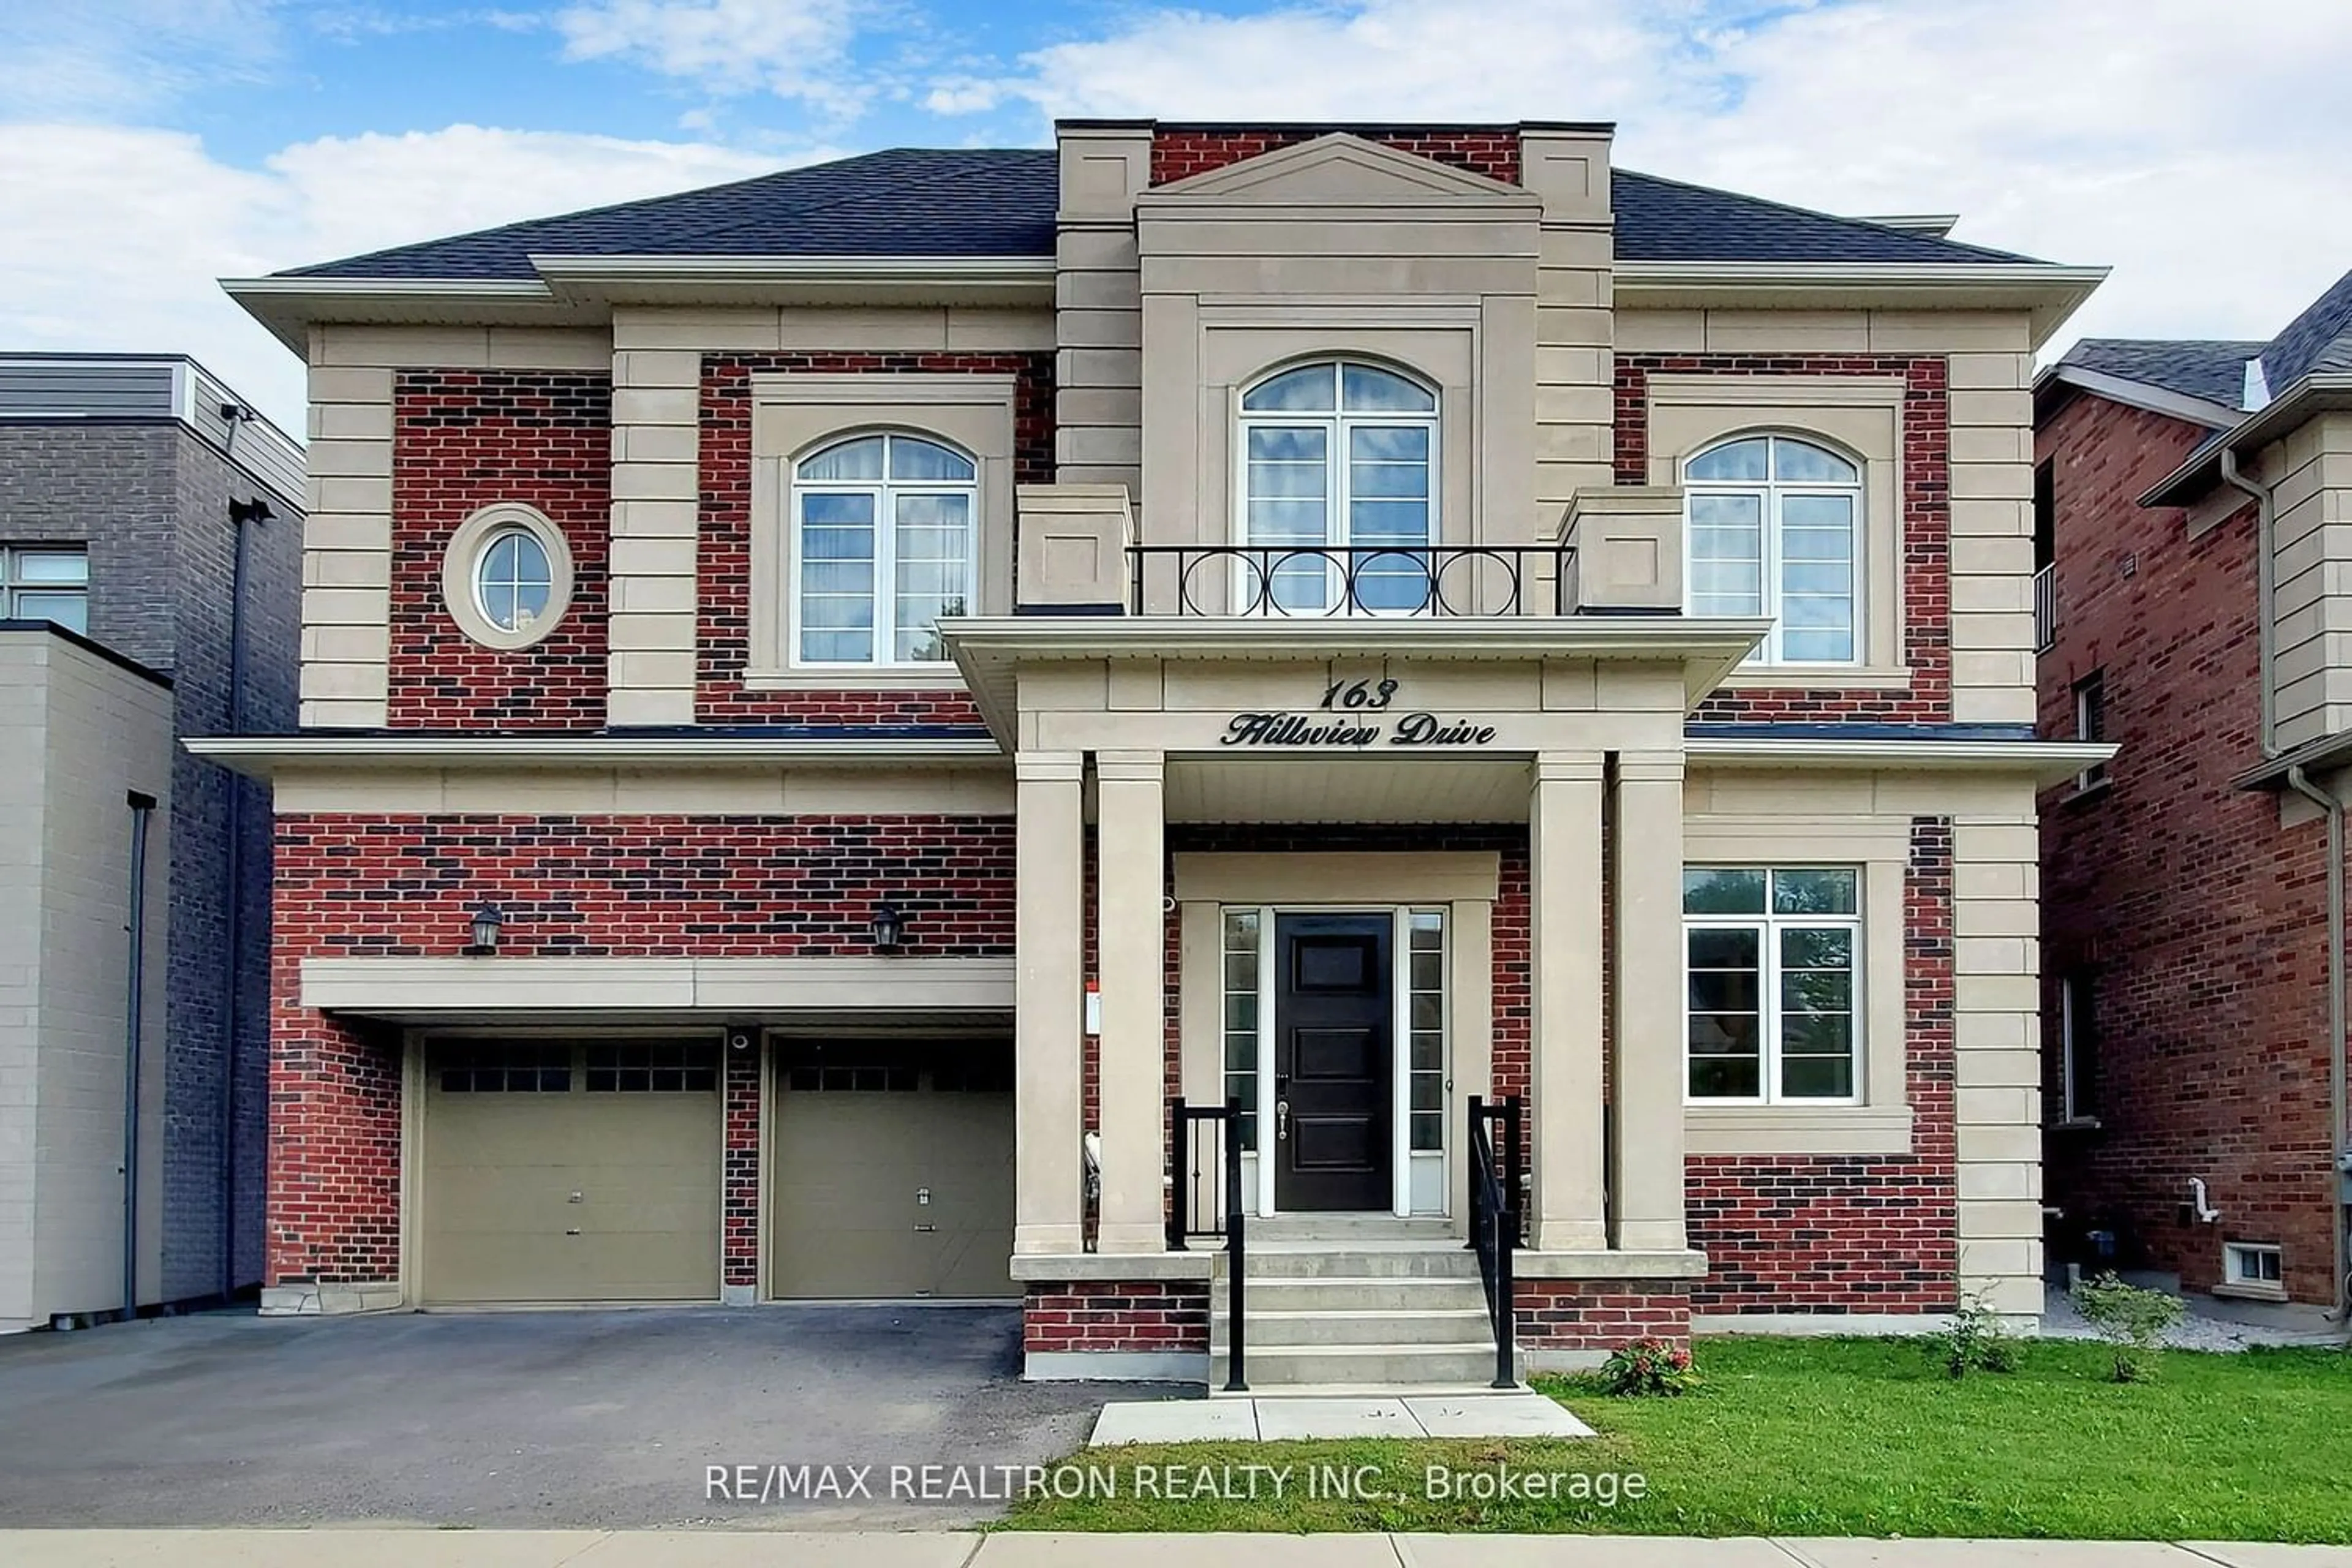 Home with brick exterior material for 163 Hillsview Dr, Richmond Hill Ontario L4C 8R3